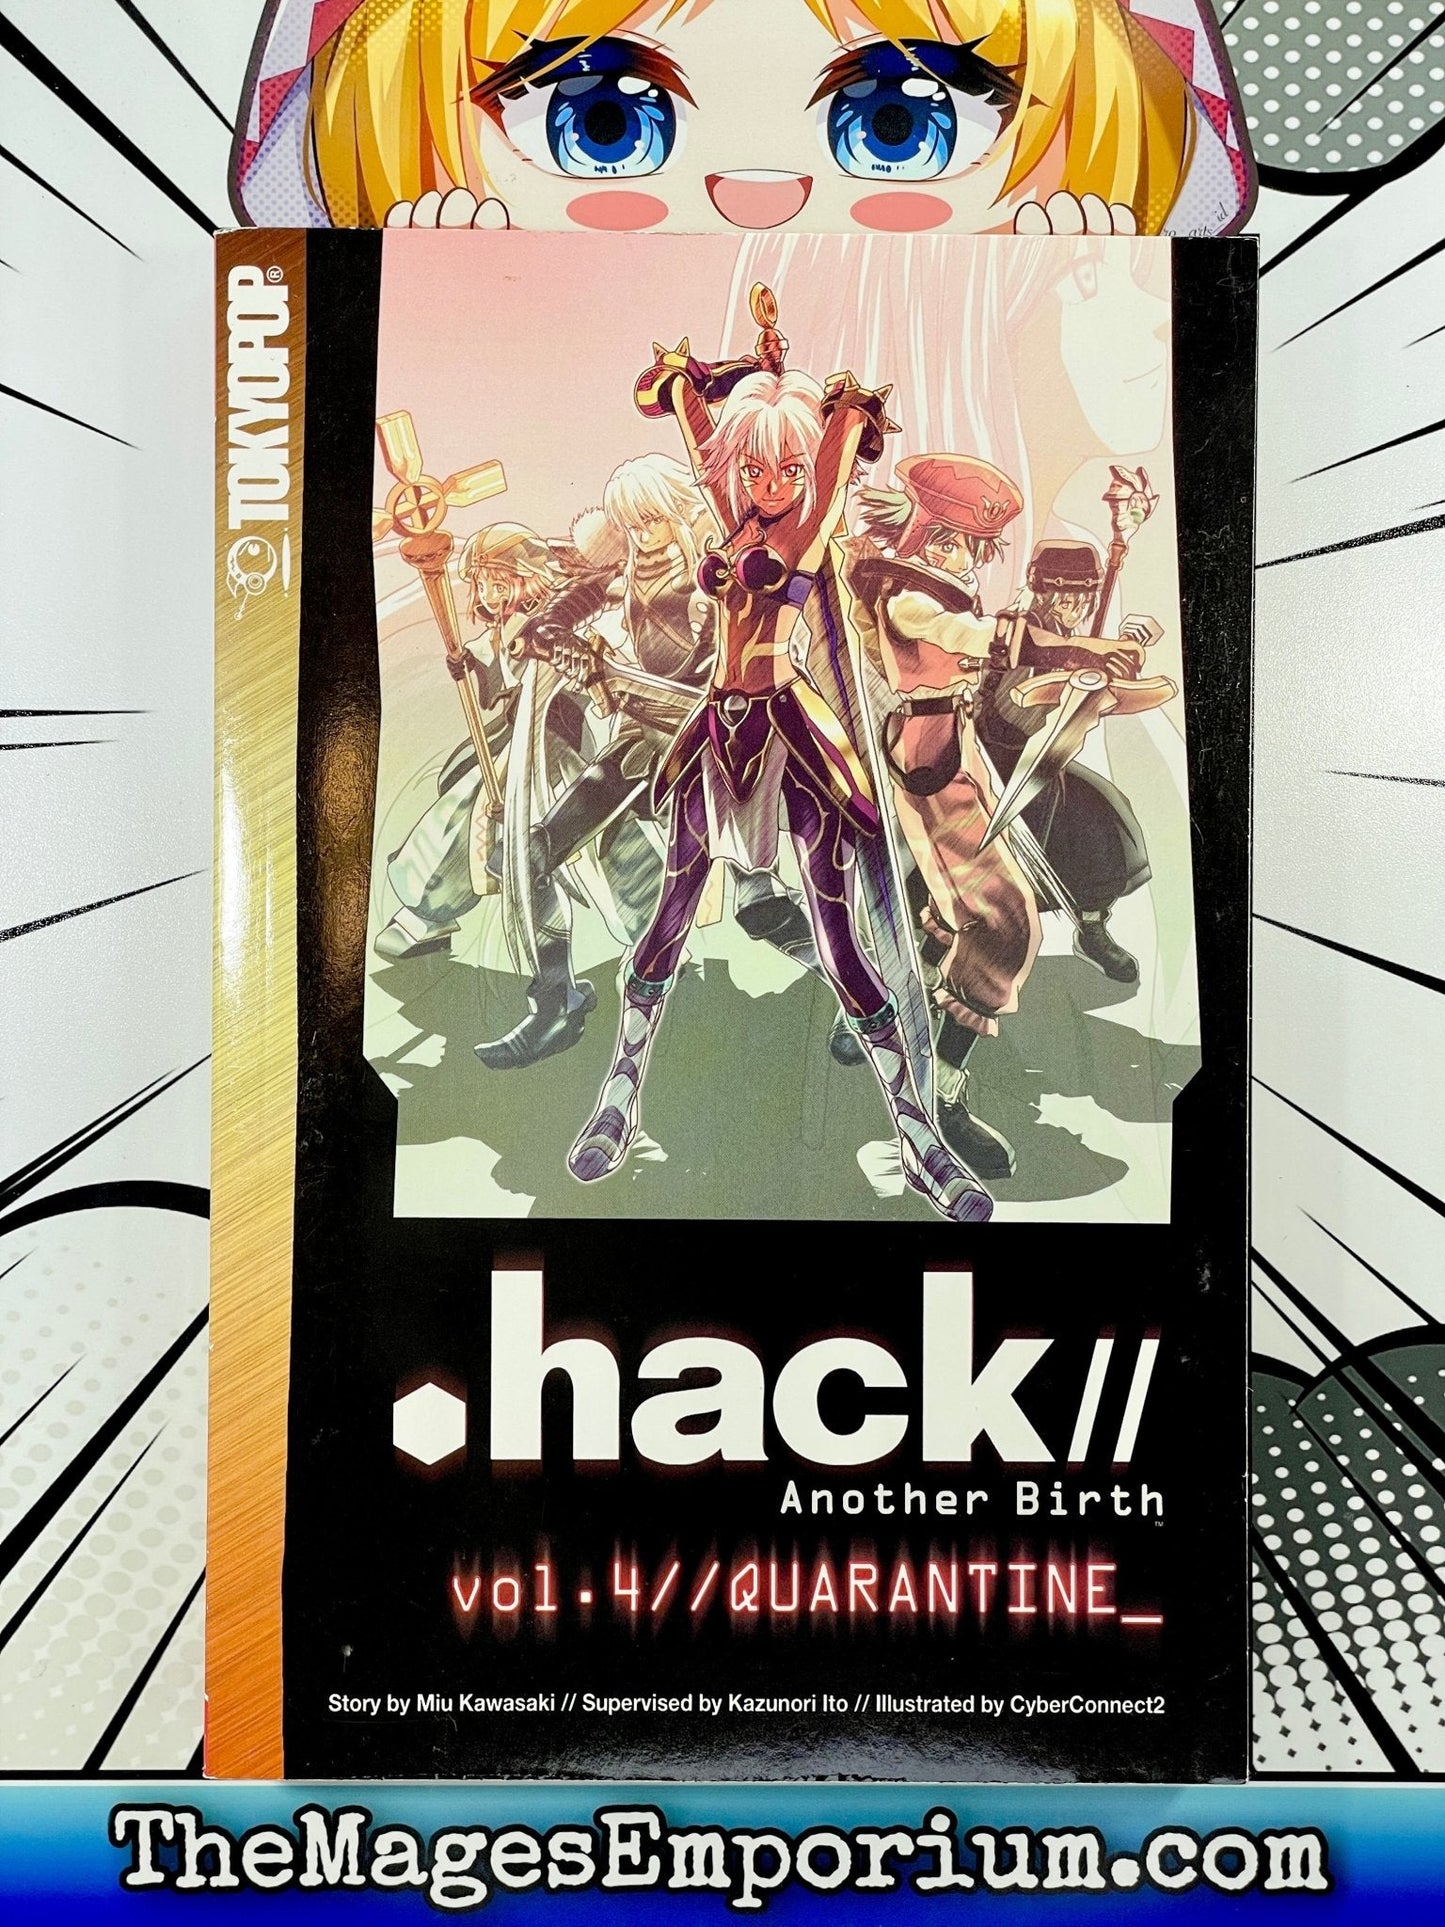 .hack//Another Birth Vol 4